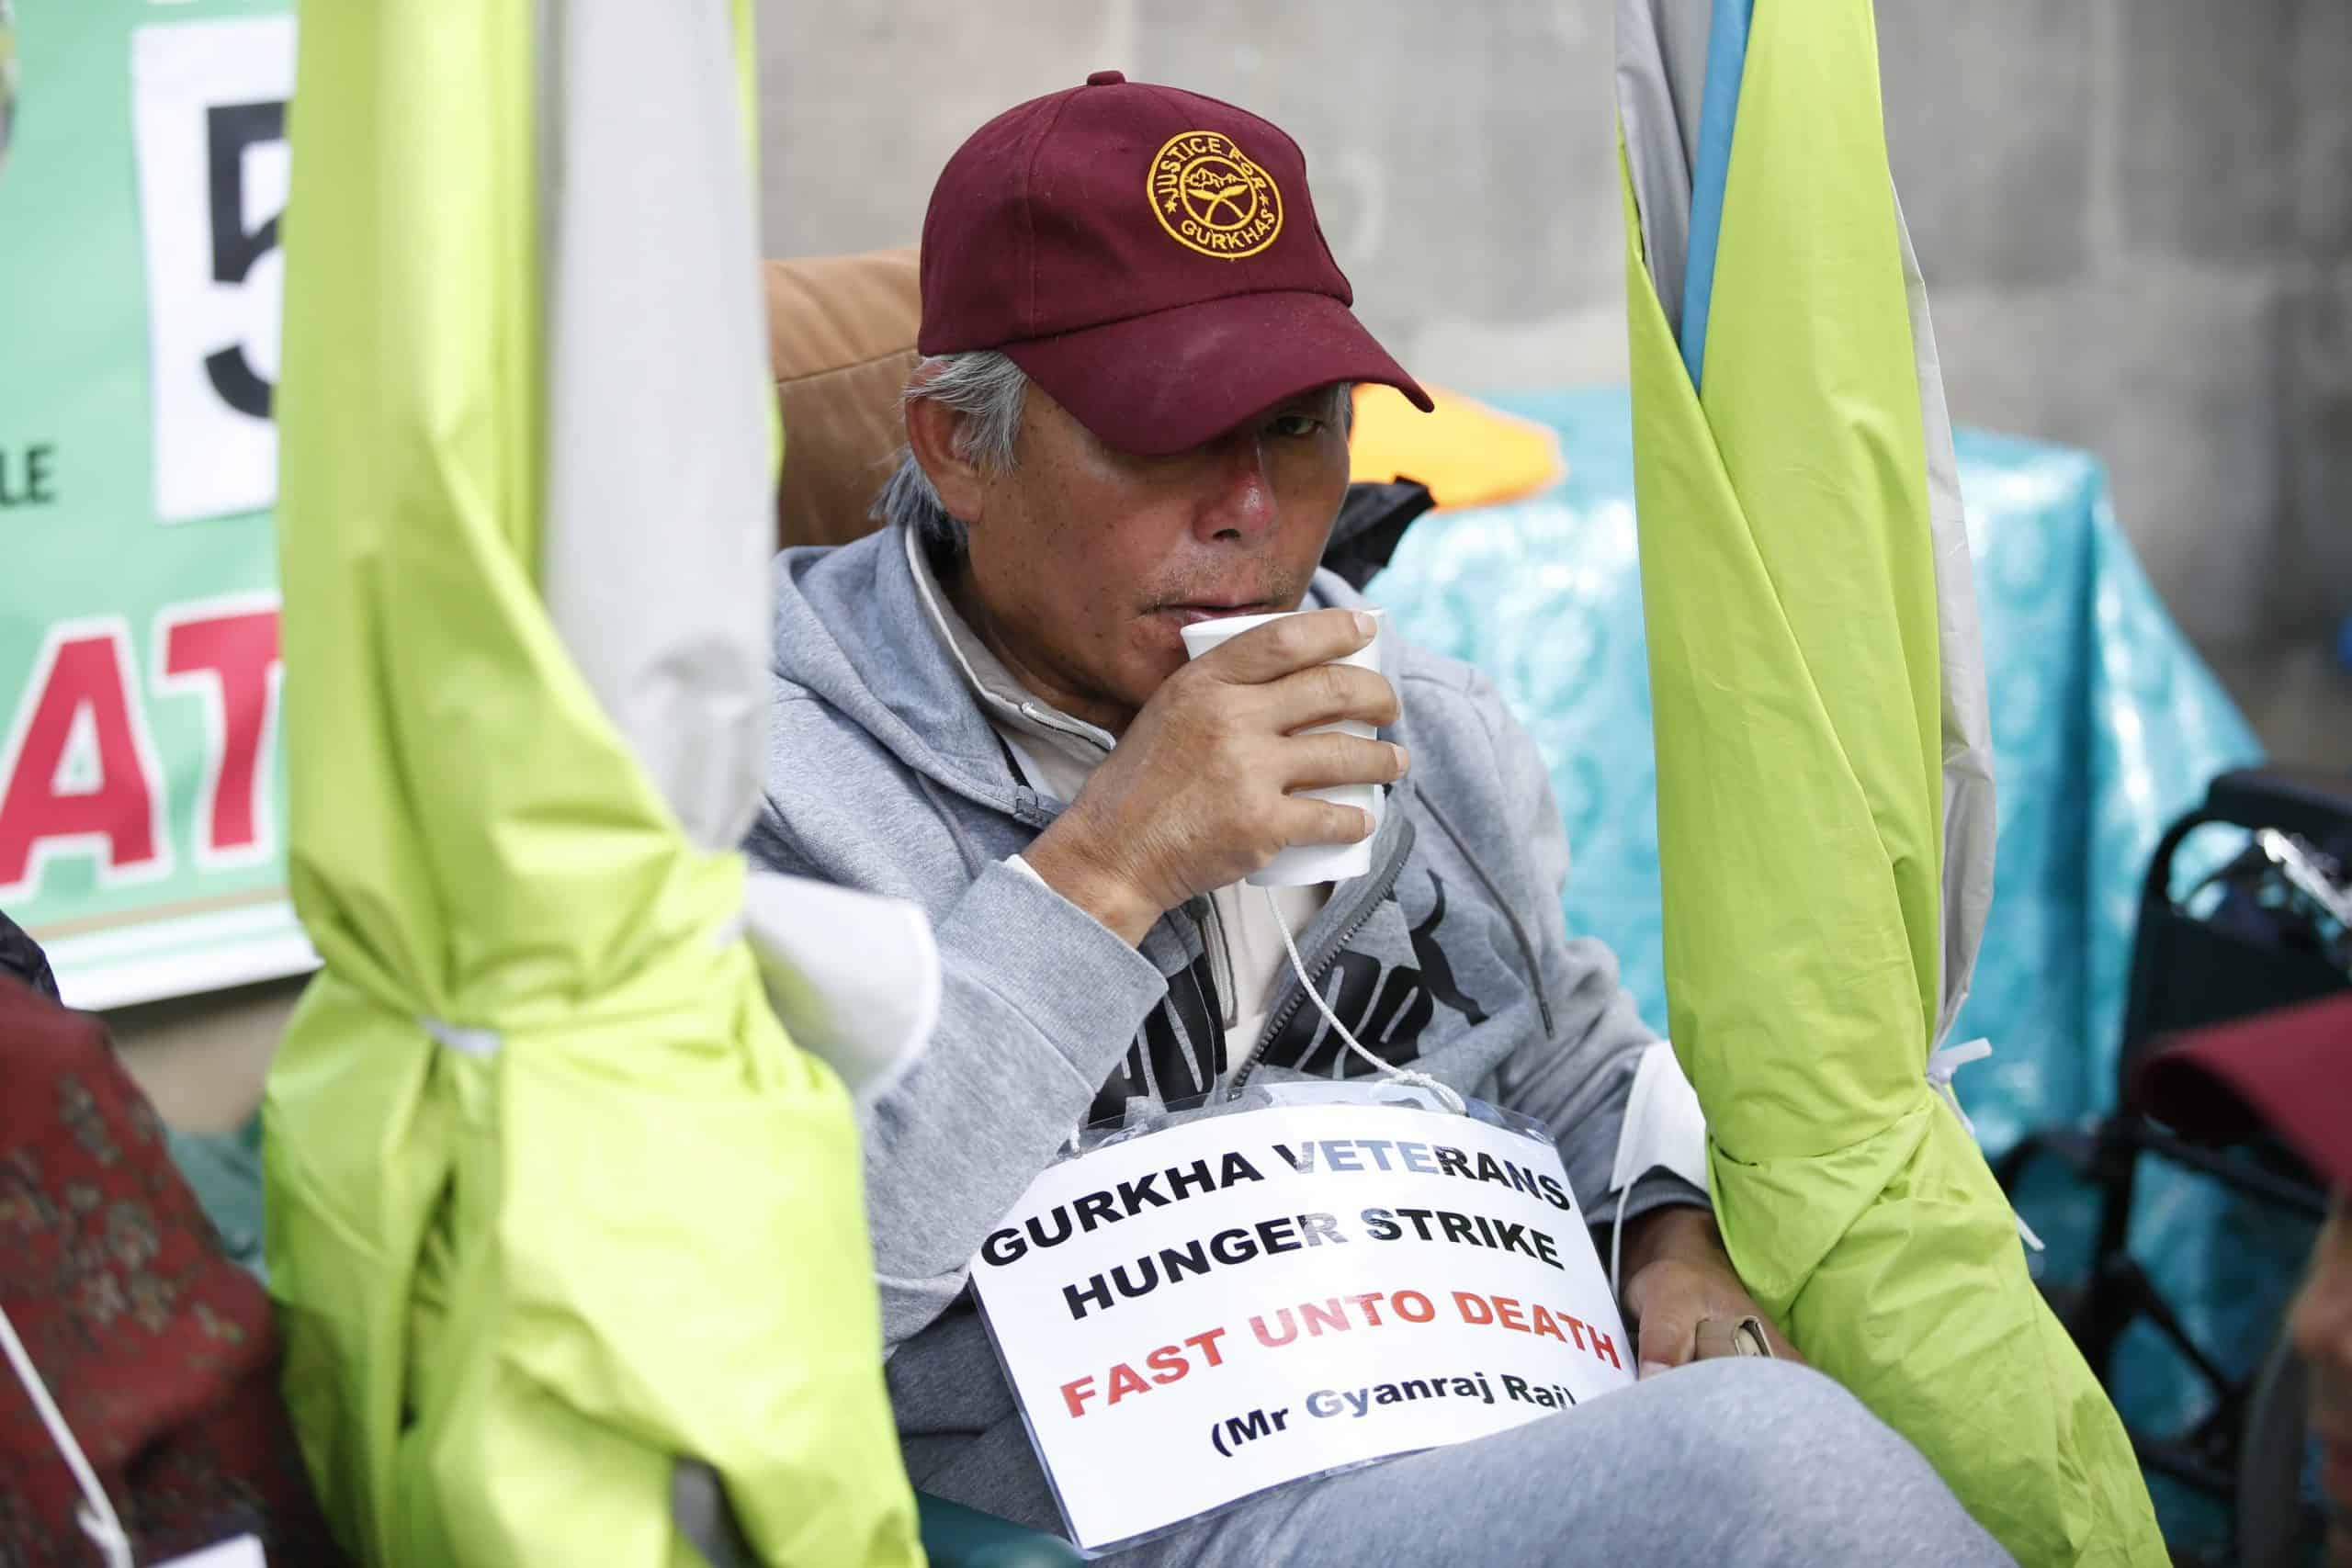 ‘If I die another will come:’ Gurkhas say more will join hunger strike over pension disparity